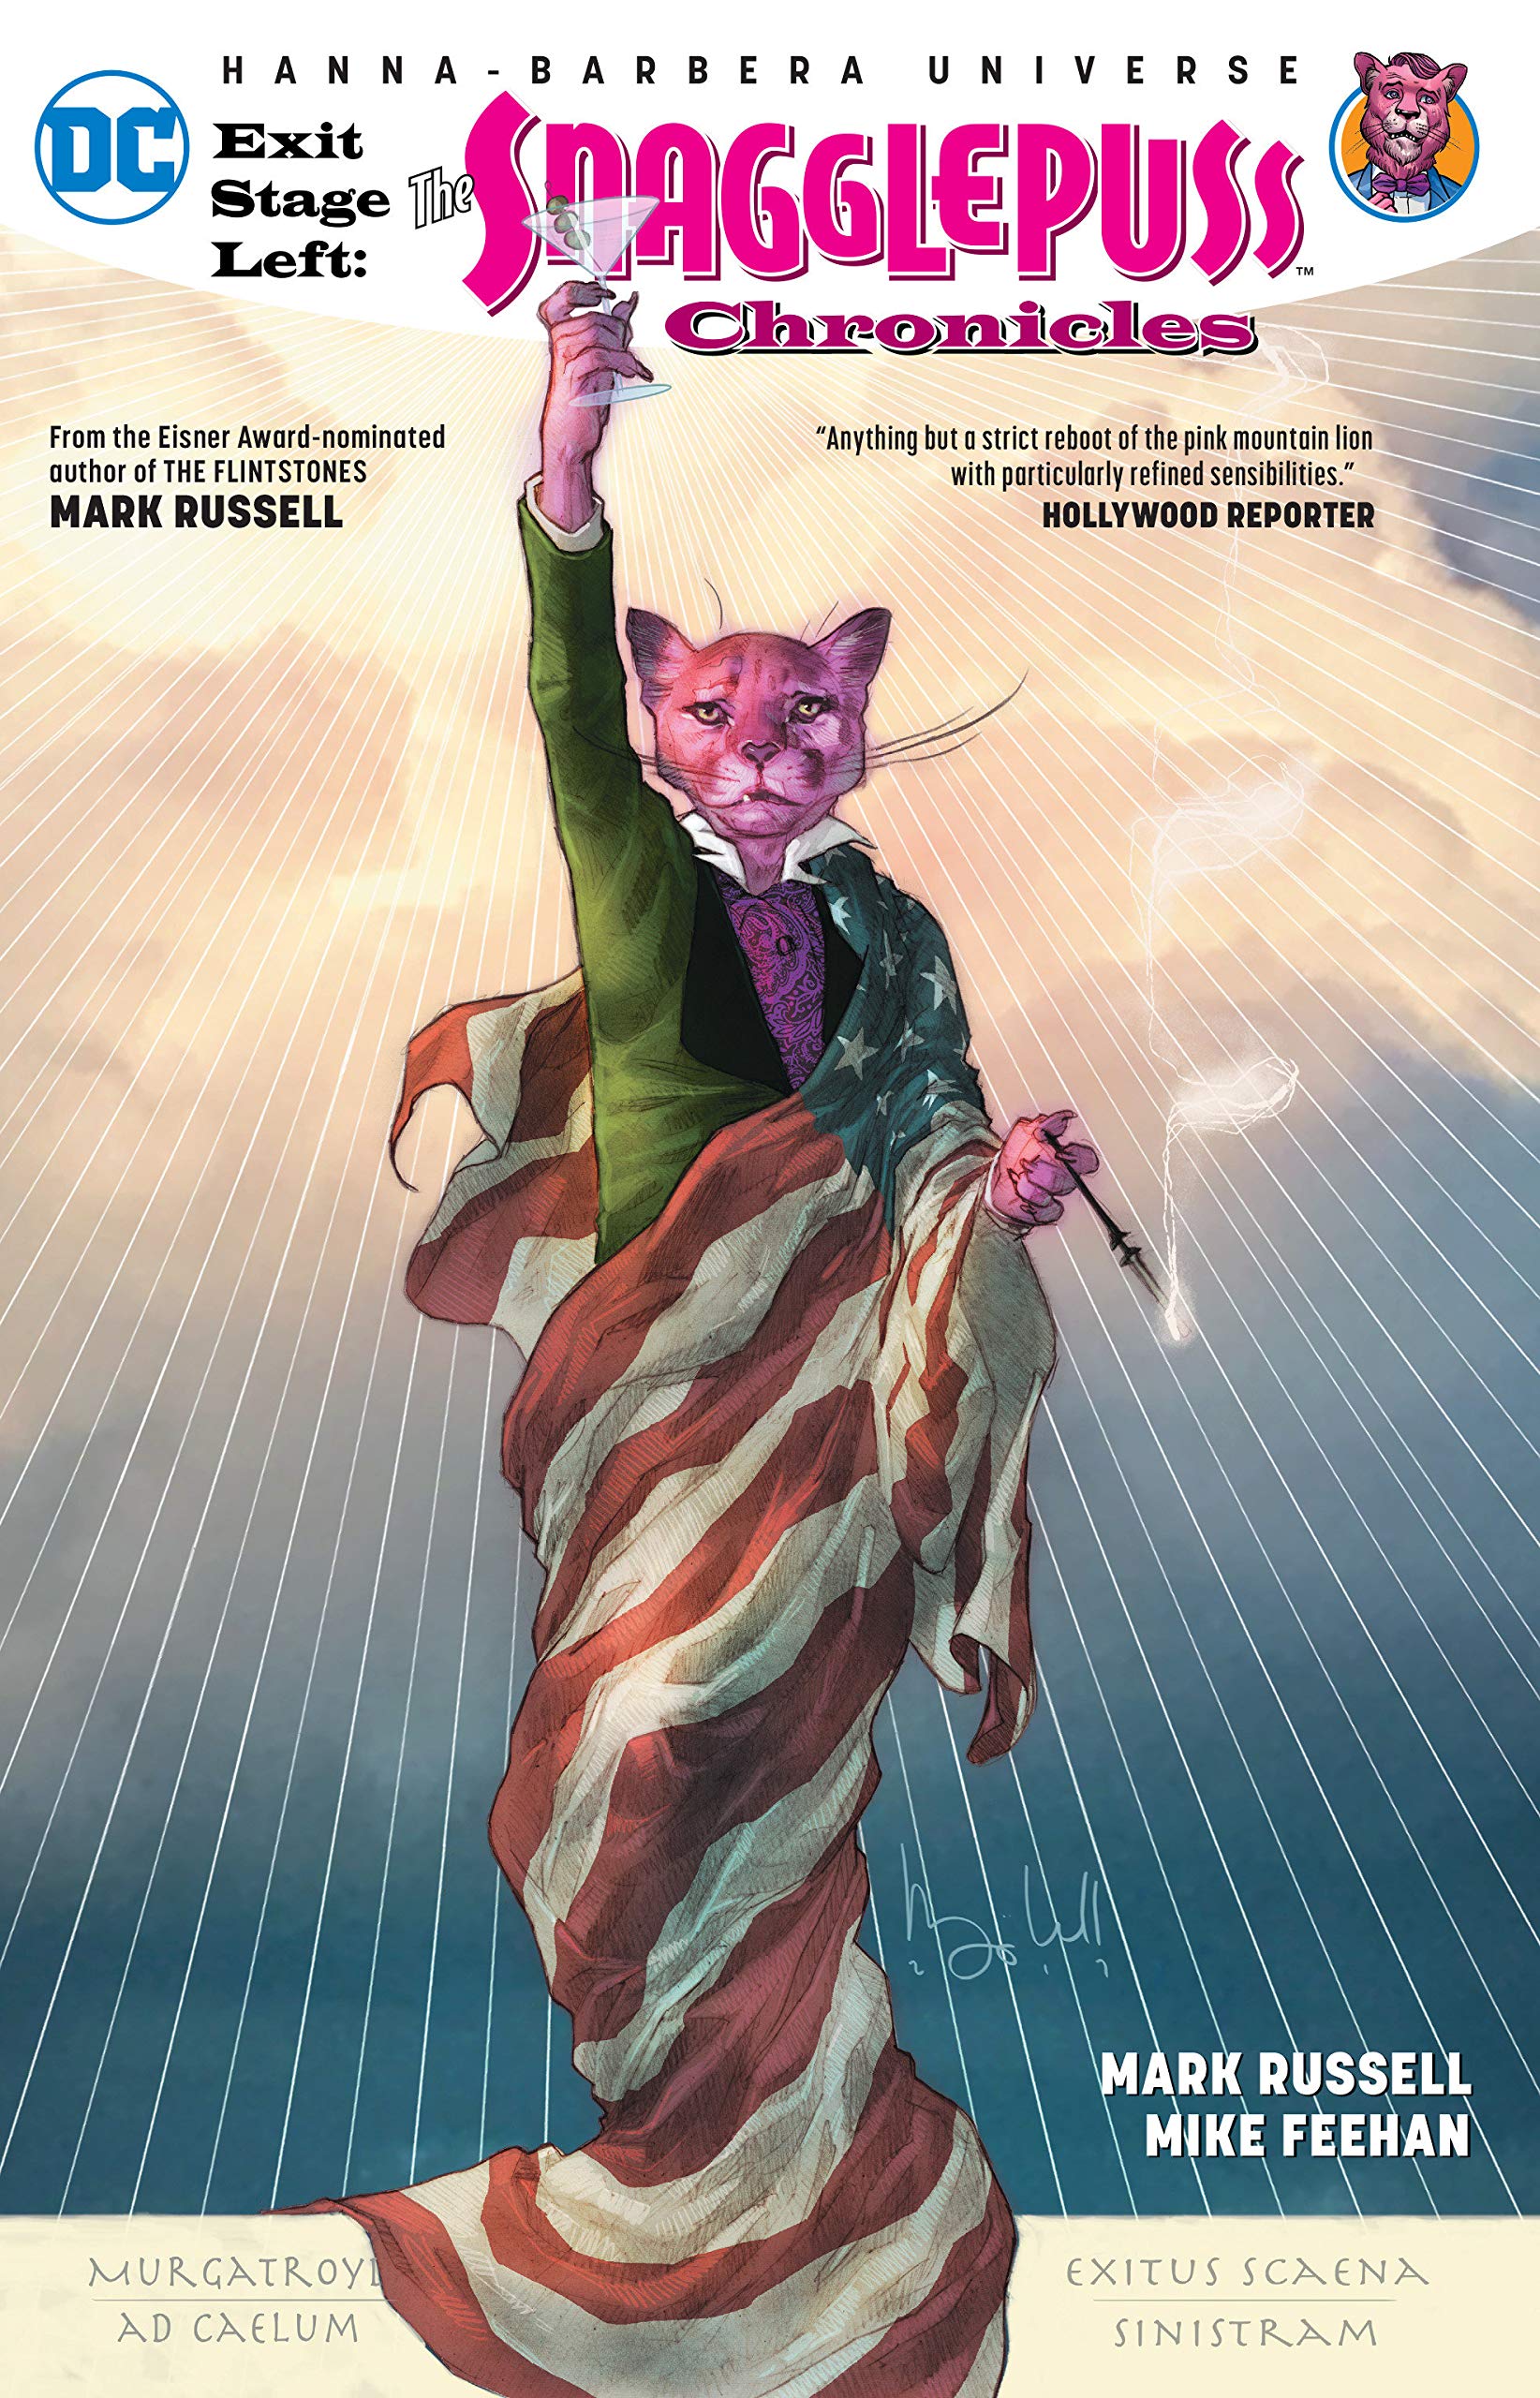 2019 GLAAD Media Awards Nominees: Exit Stage Left: The Snagglepuss Chronicles